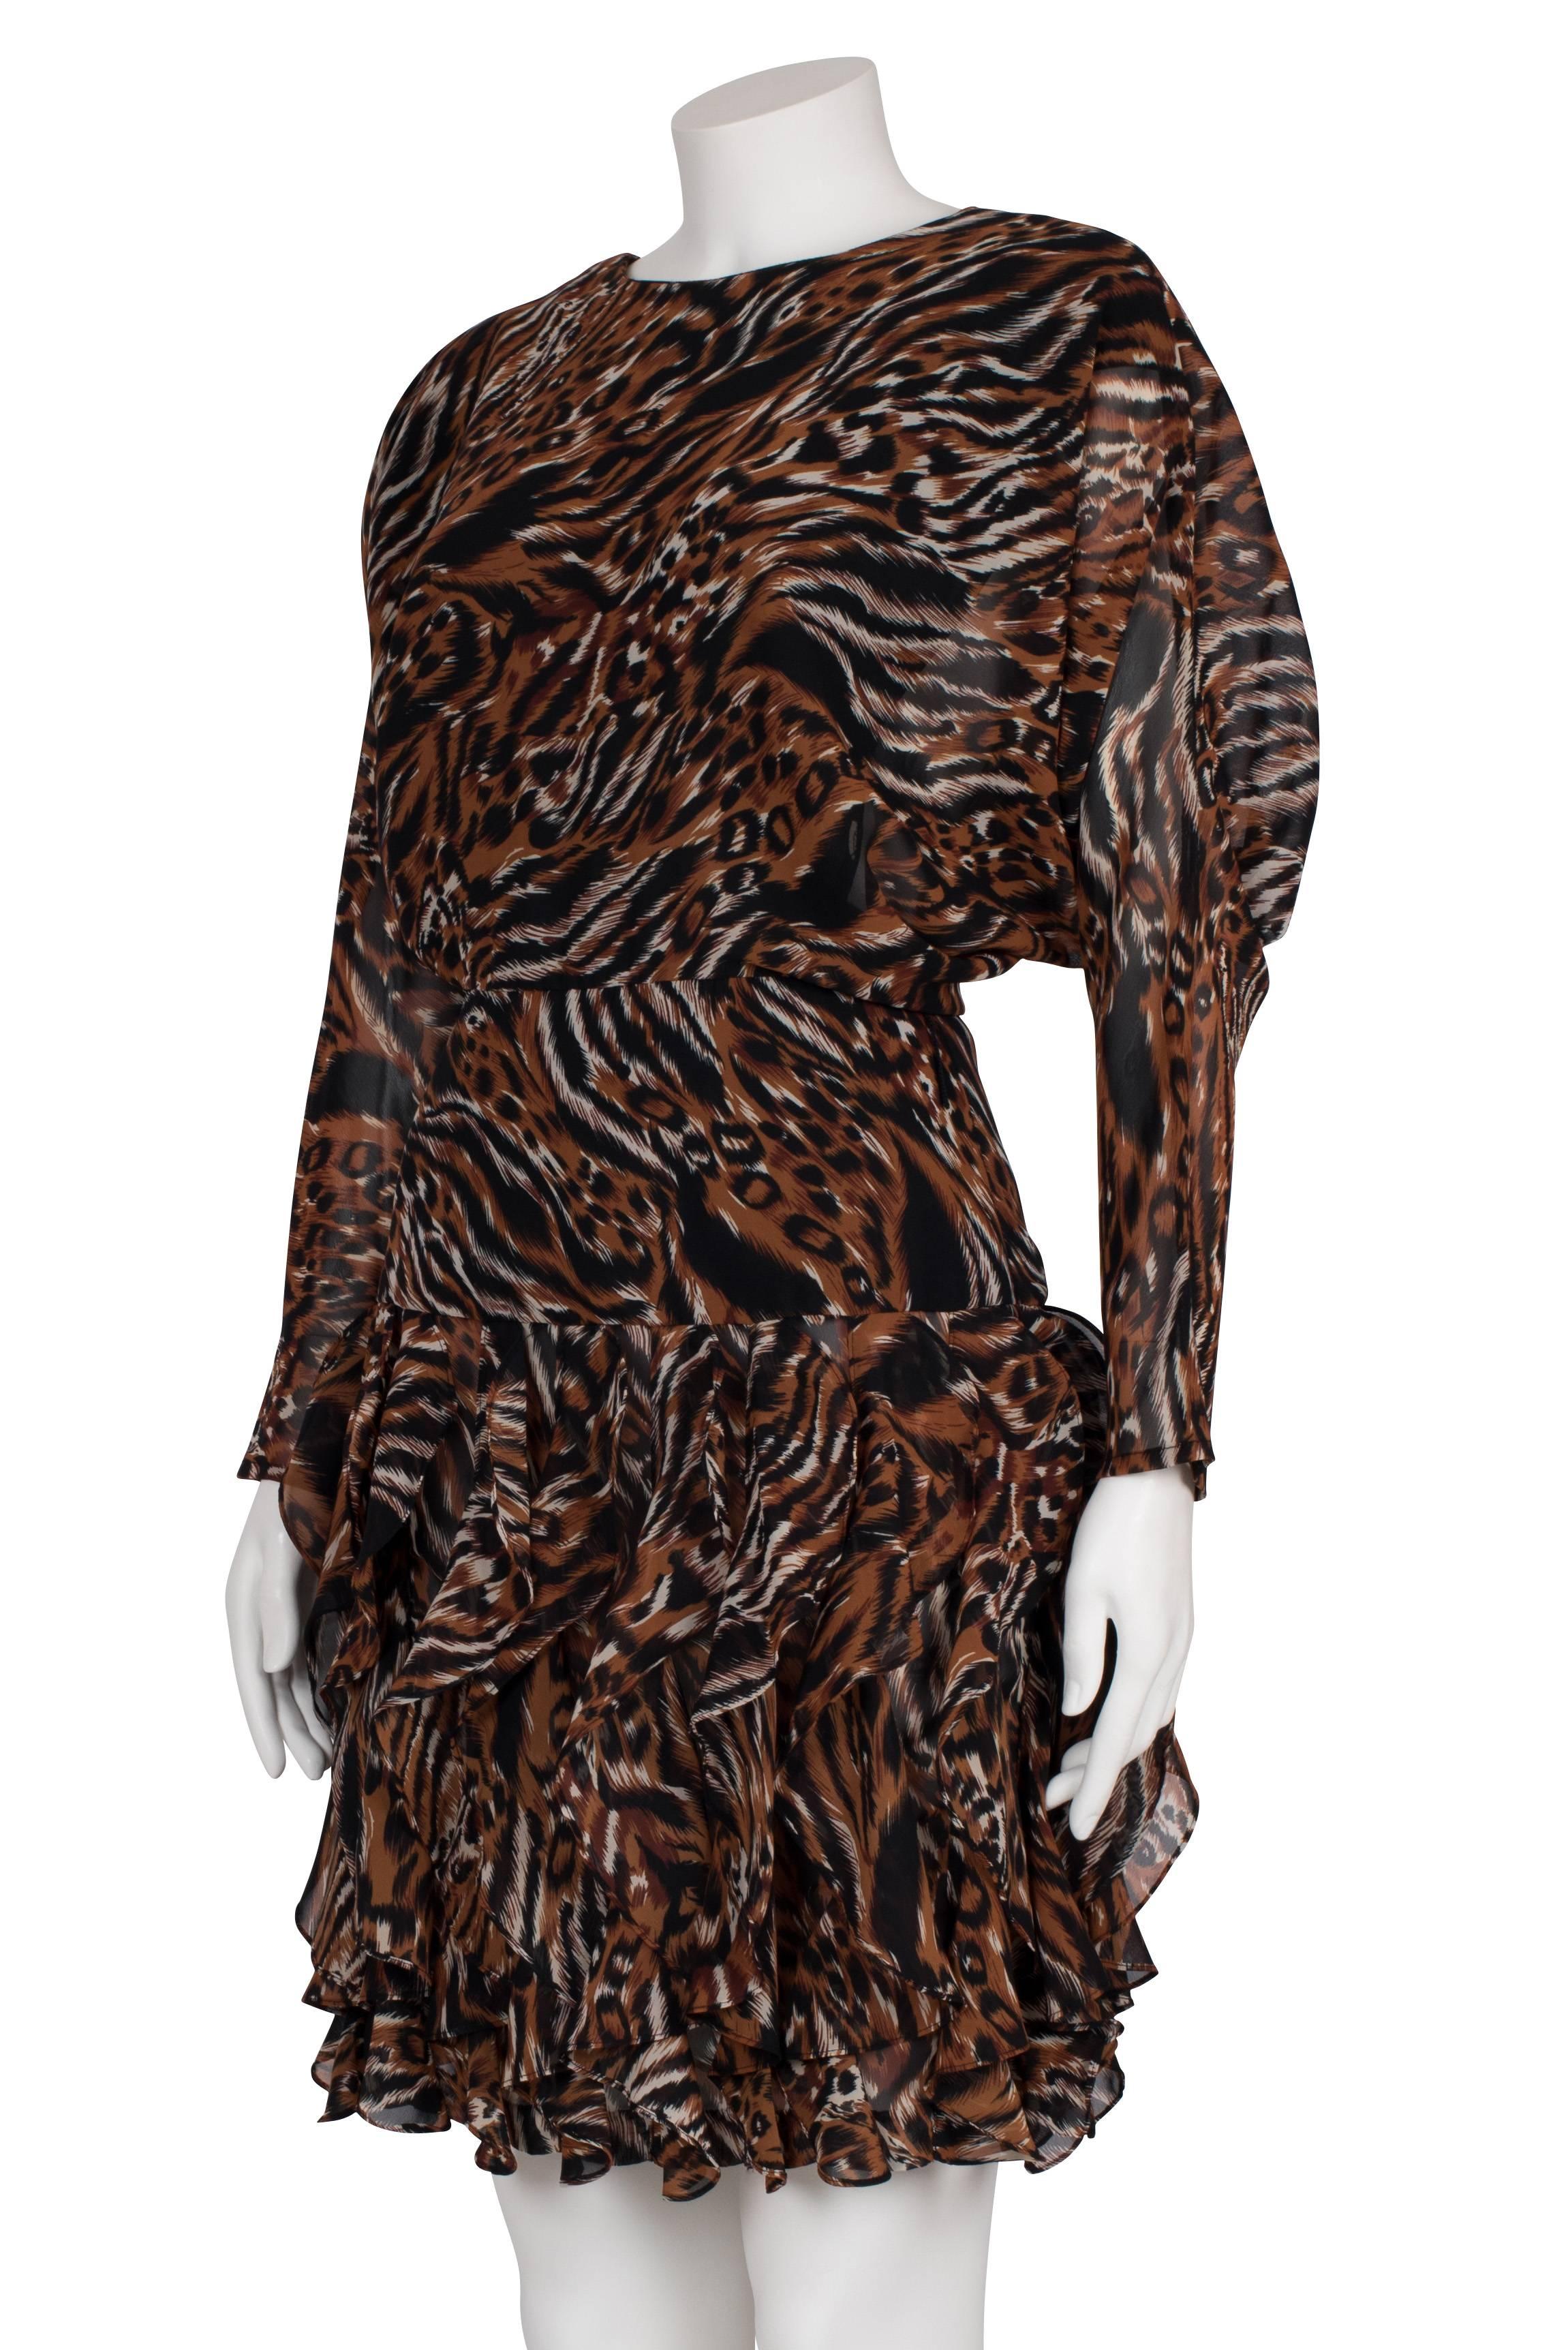 1980's J. Harris Animal Print Ruffled Skirt Backless Dress In Excellent Condition For Sale In London, GB